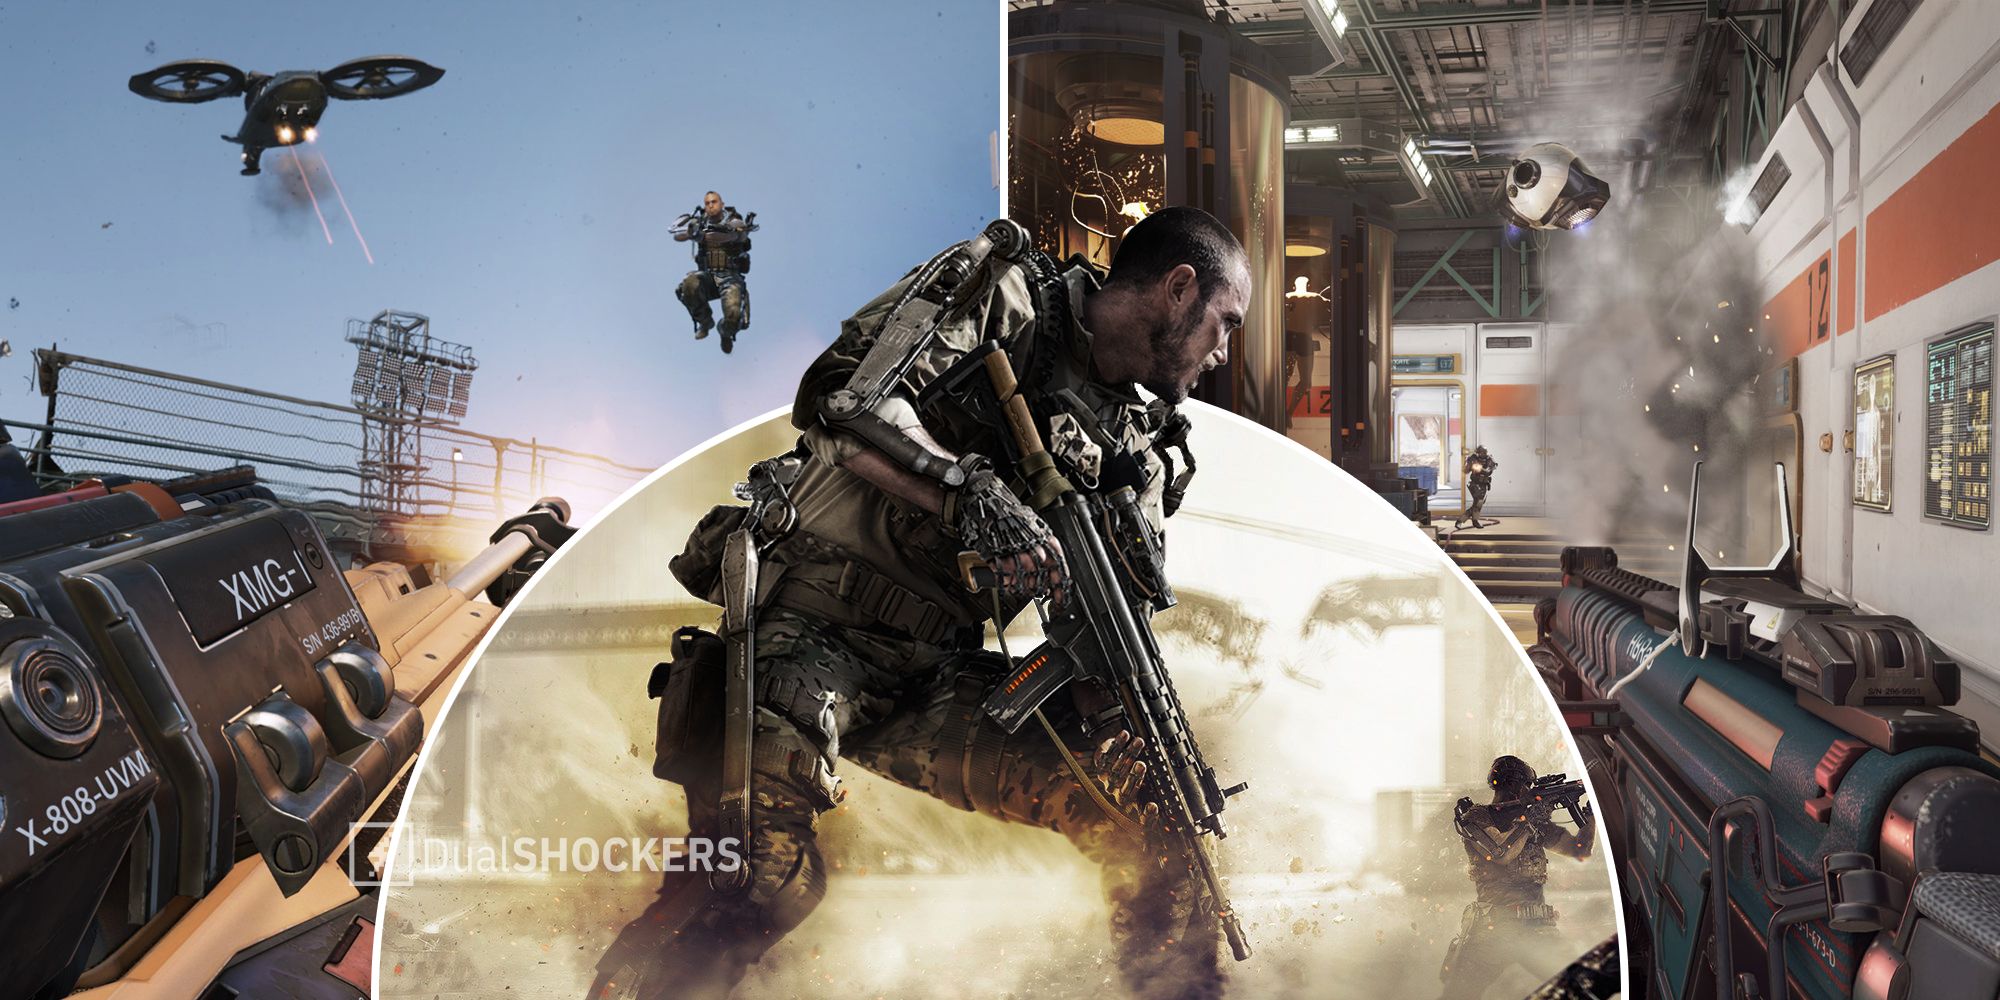 Call Of Duty Advanced Warfare 2 Was In Development Before Being